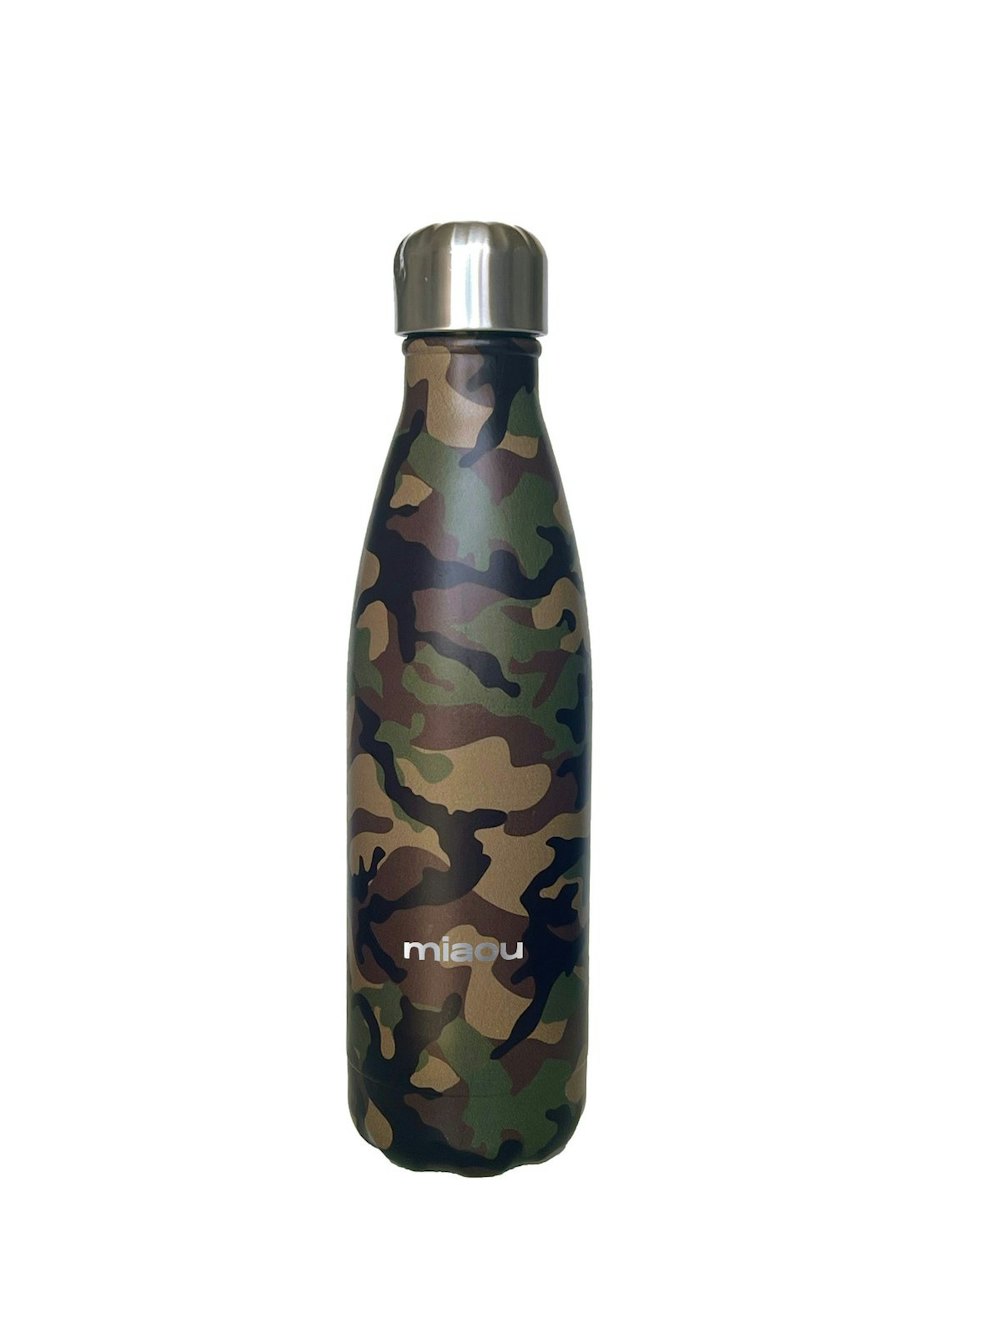 Water Bottles By Collina Strada, Prada, & More Are Spring's Top Trend